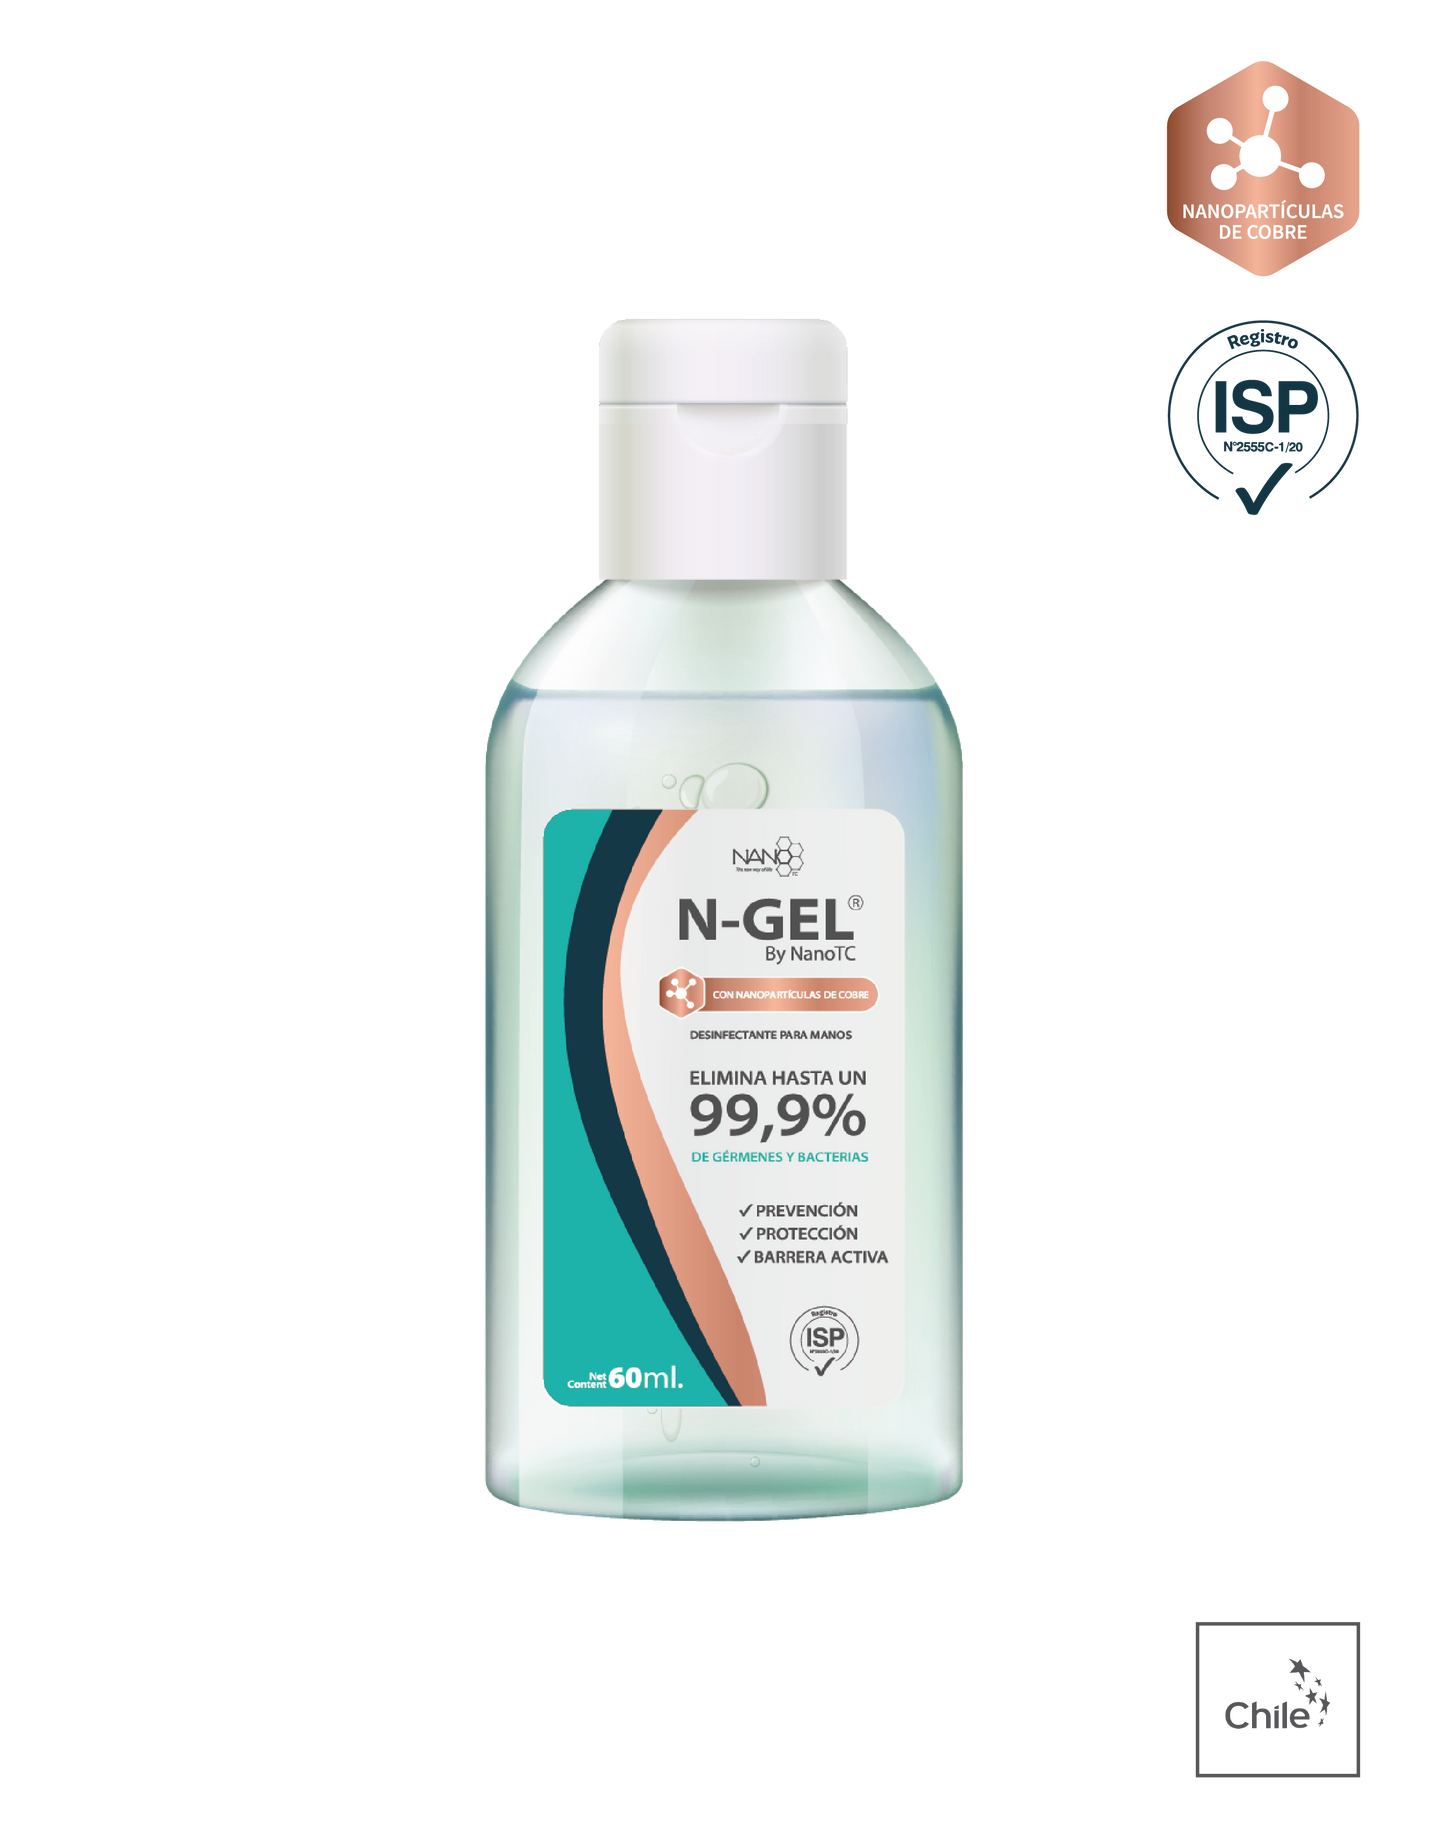 N Gel – Alcohol sanitizing gel with copper nanoparticles